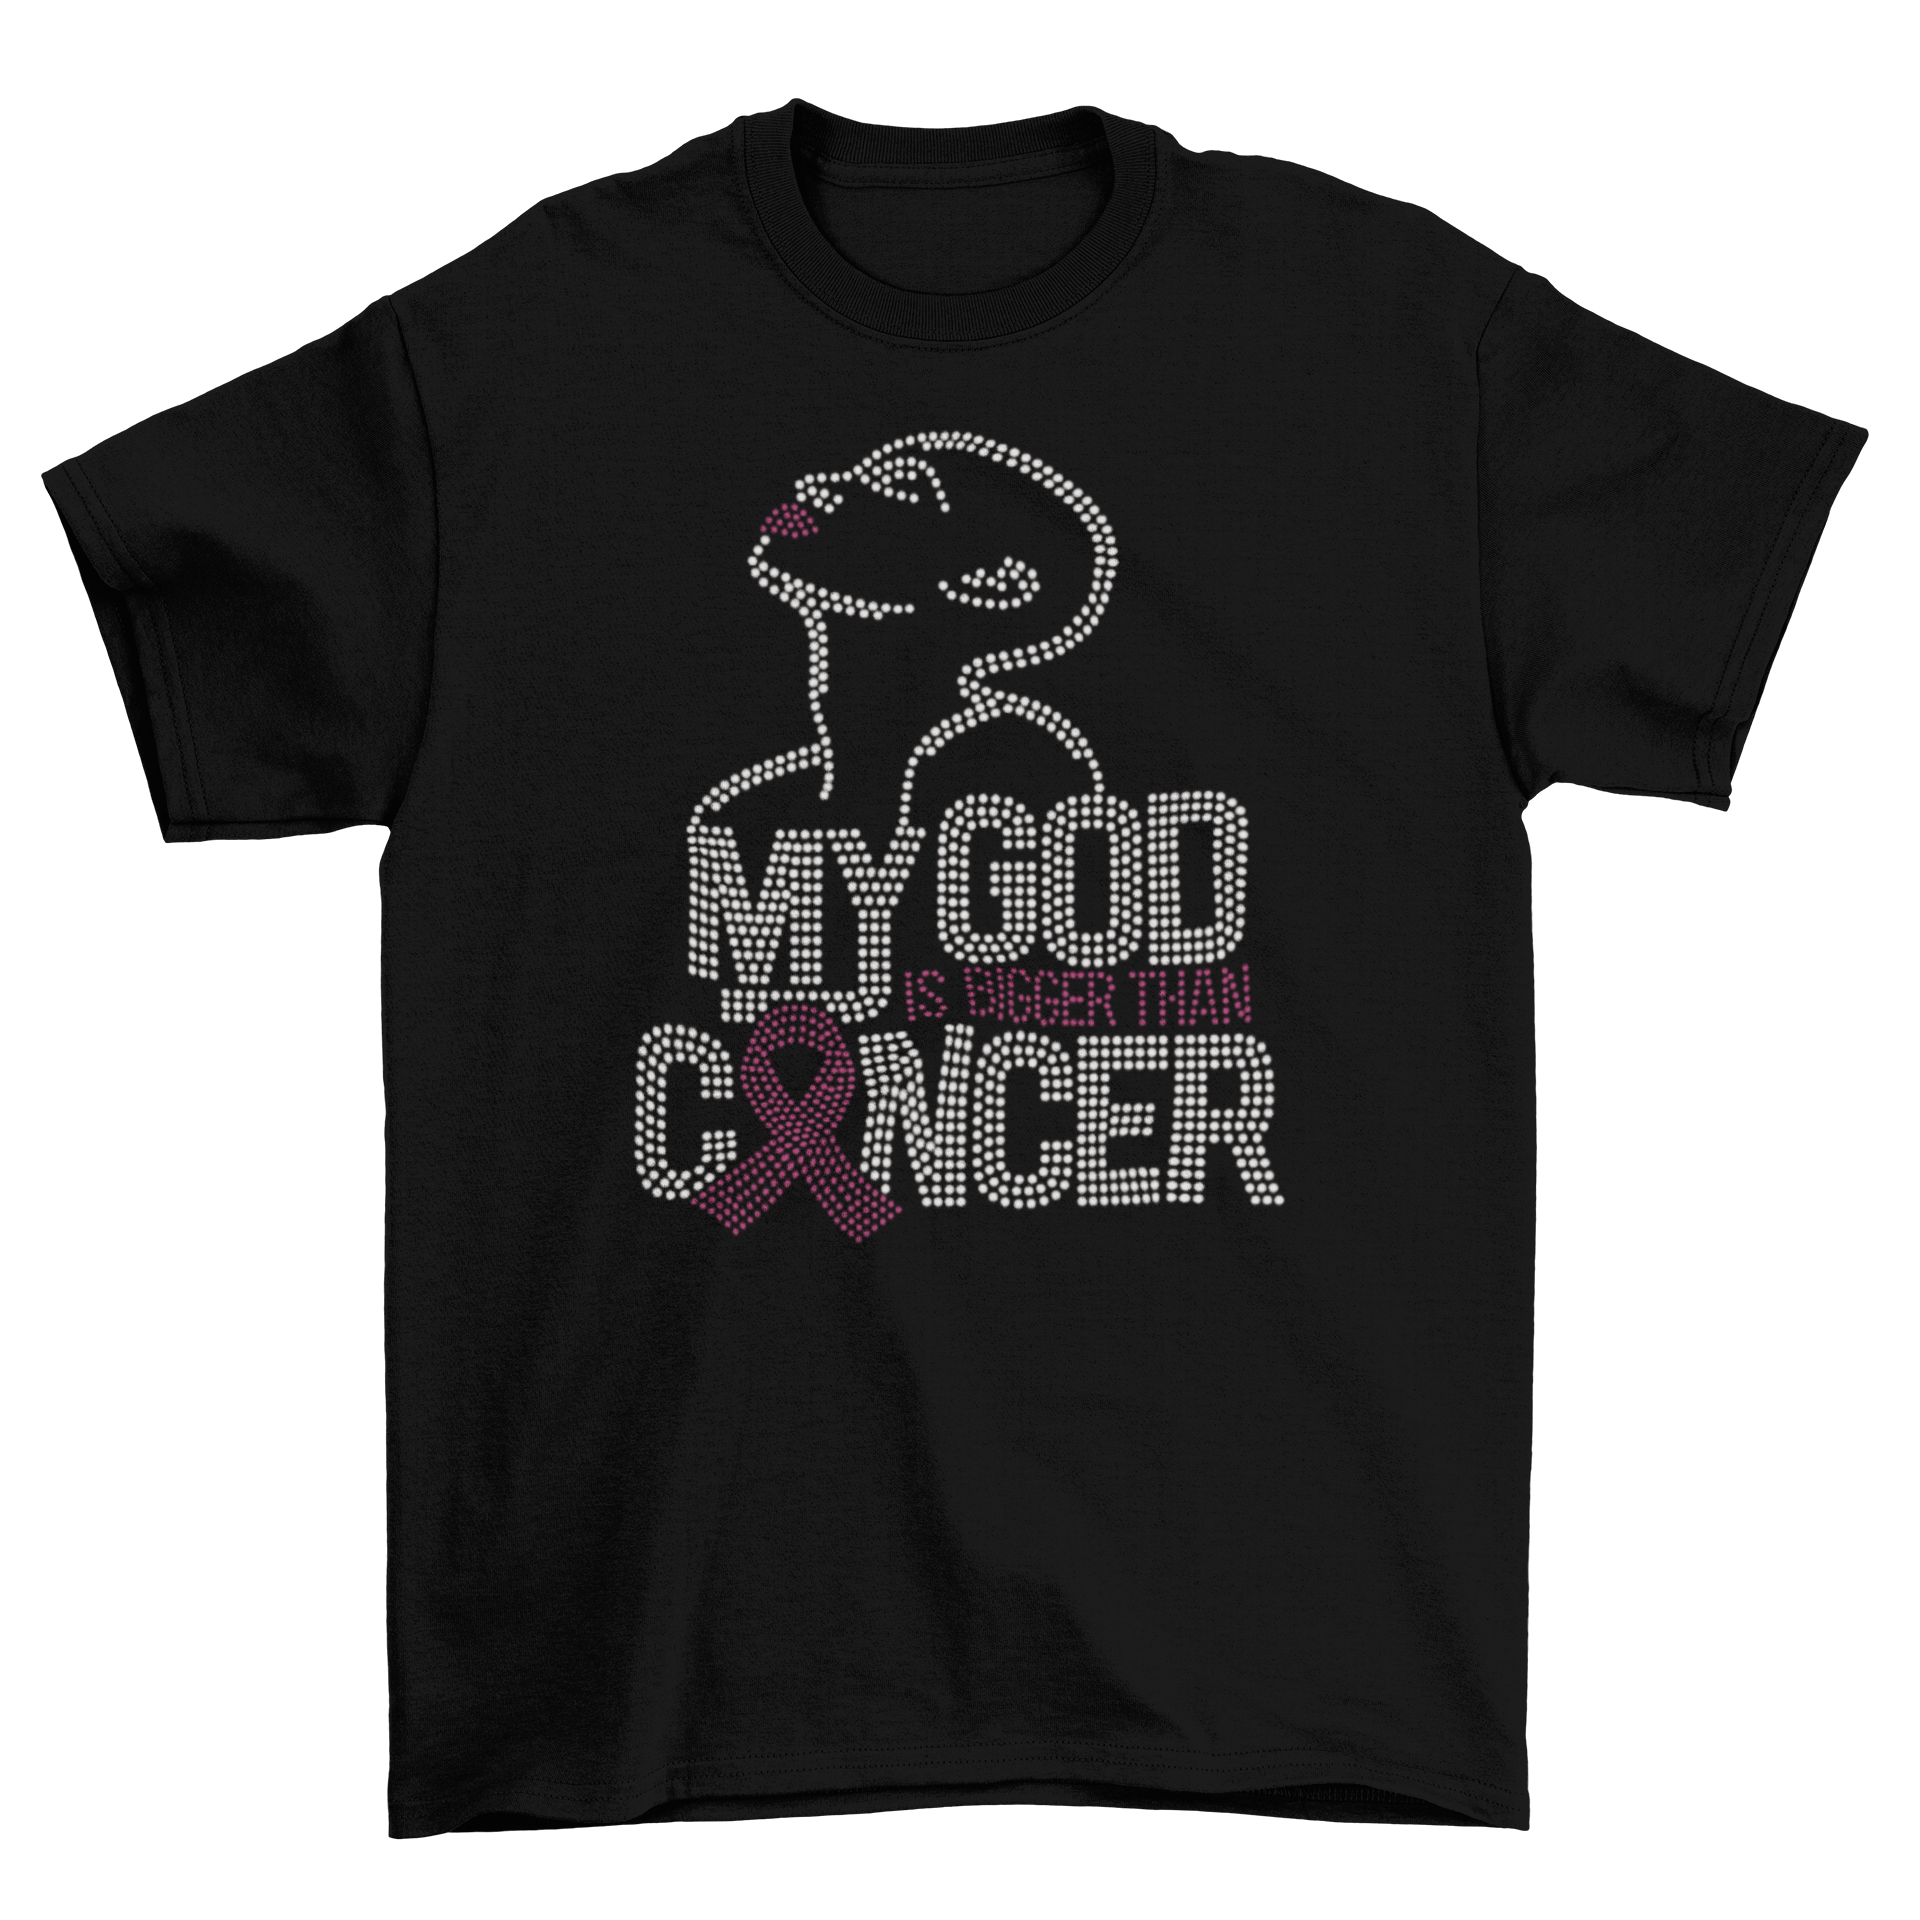 My God is Bigger than Cancer Rhinestone T-Shirt-Short Sleeve Tee-Get Me Bedazzled